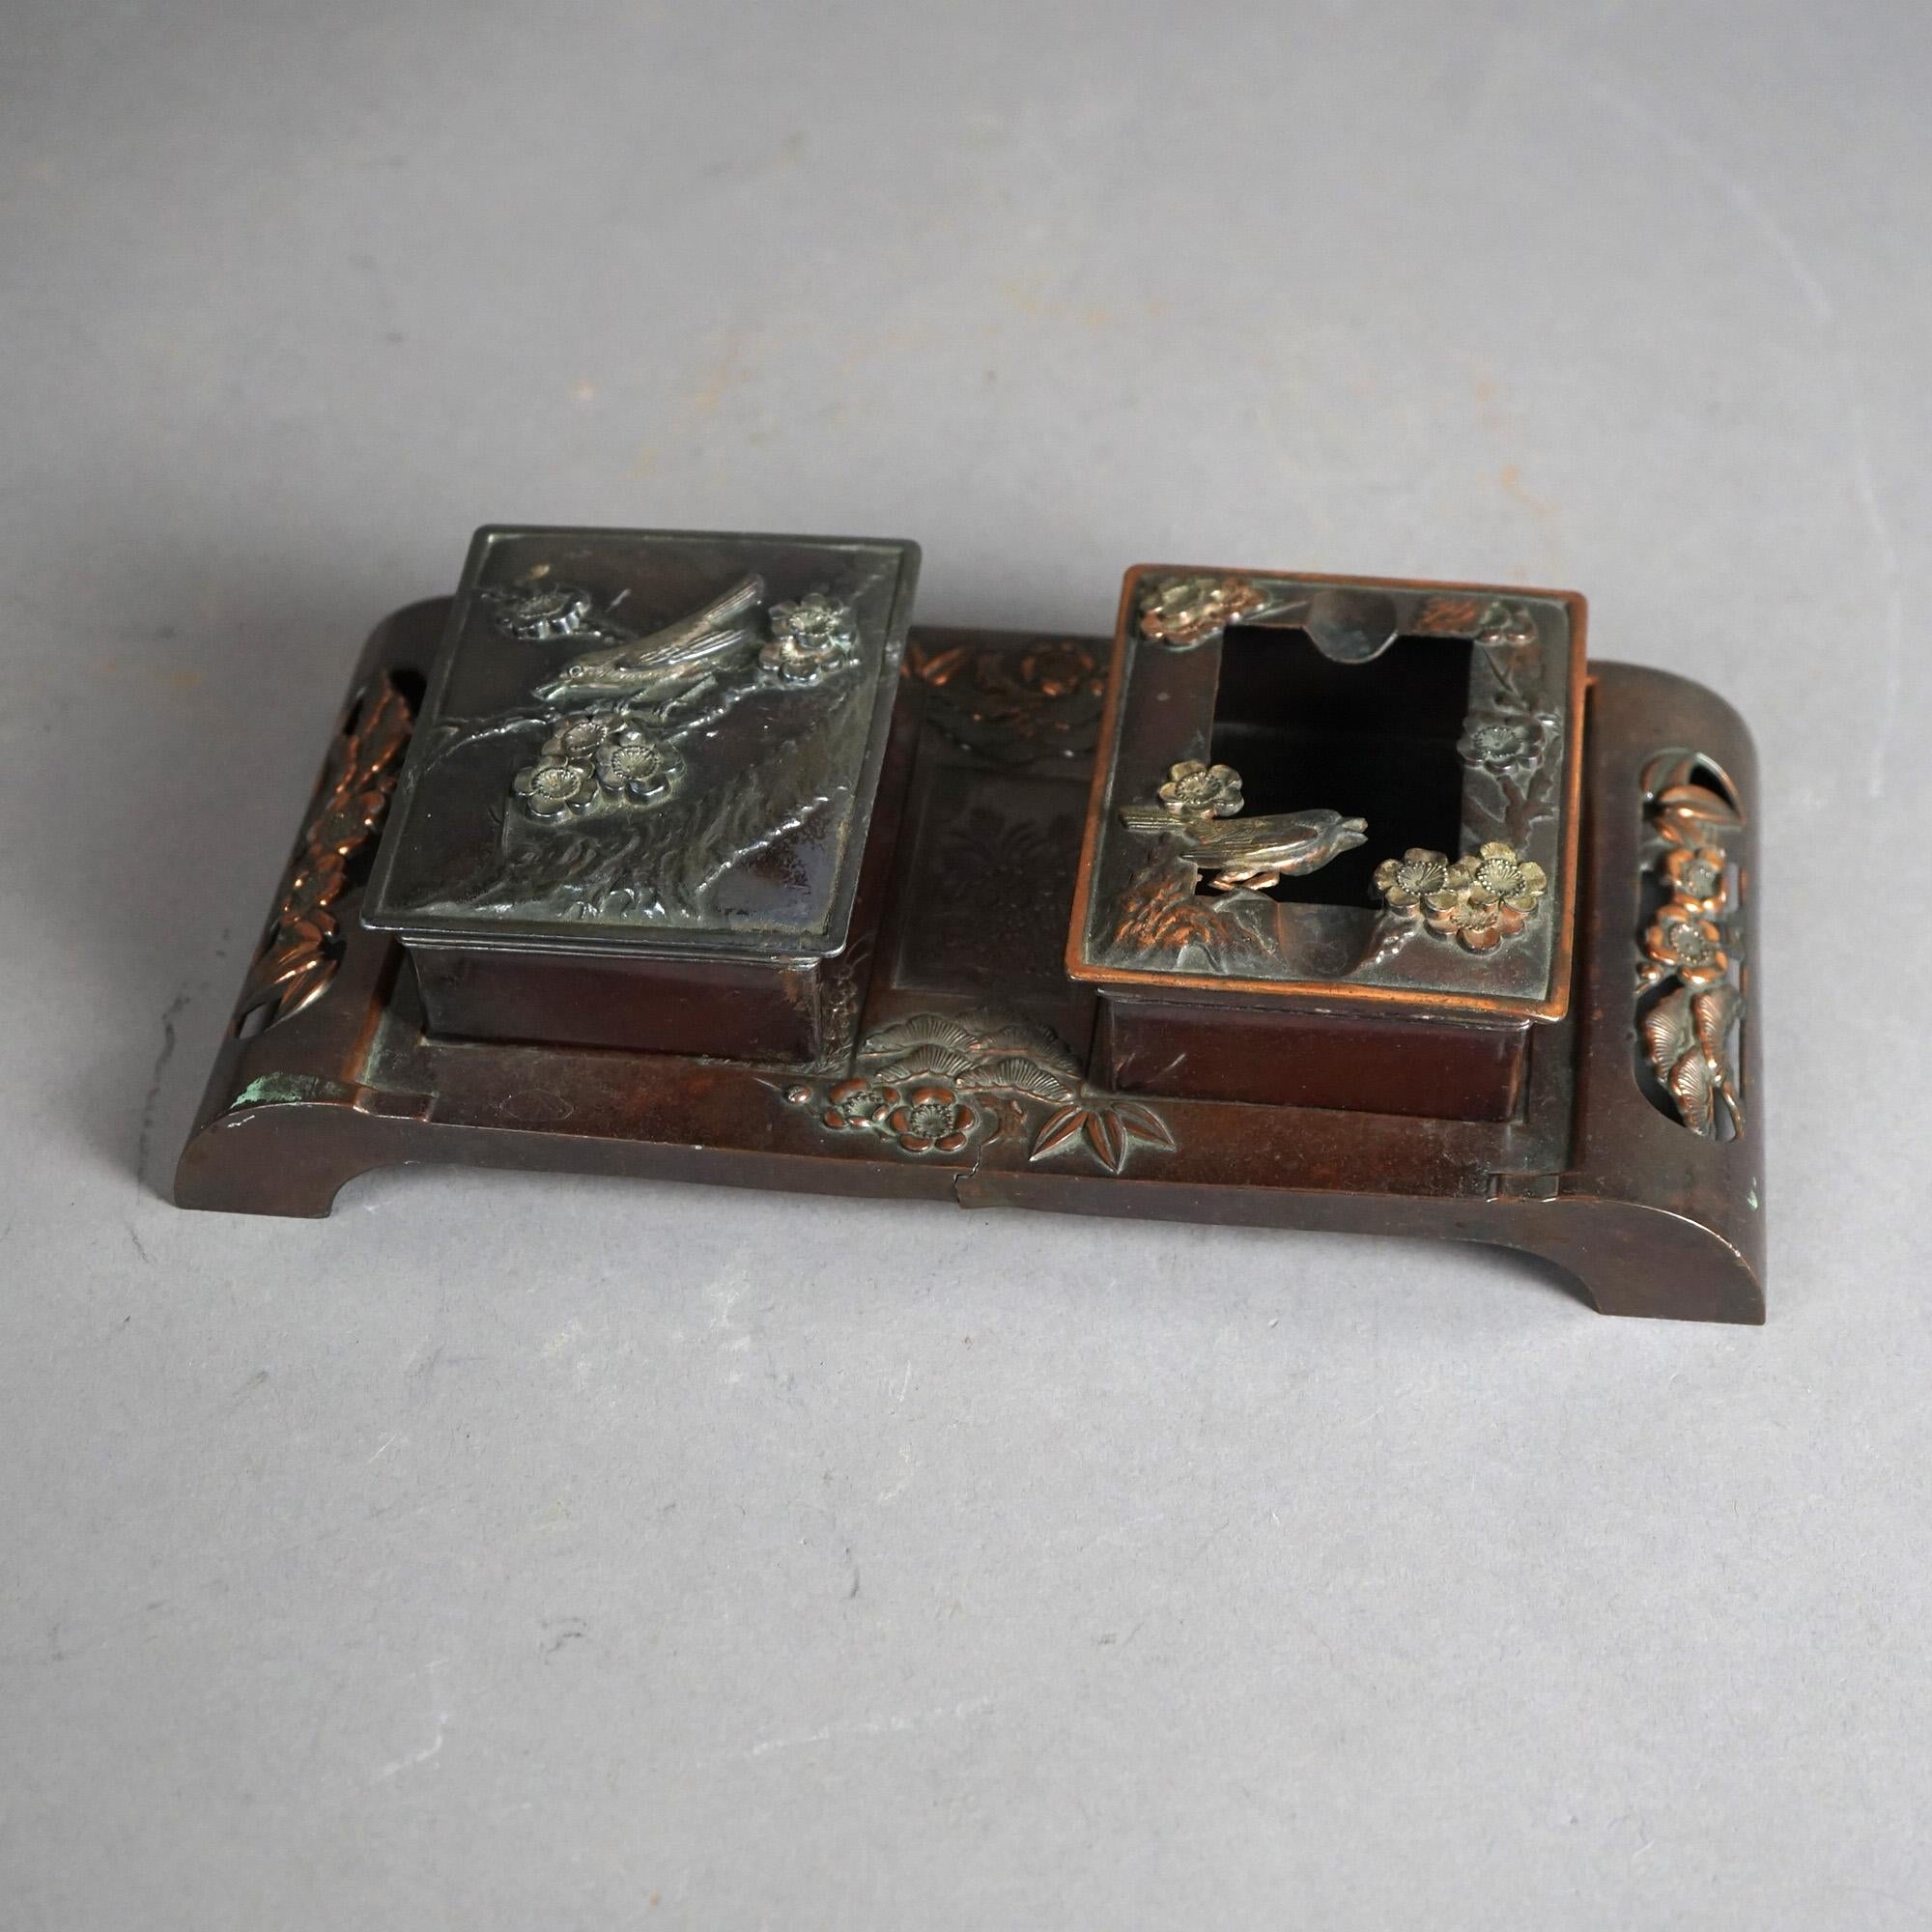 An antique Aesthetic Movement desk organizer offers mixed metal construction with two boxes on footed tray and having embossed bird and flower design, c1870

Measures- 2.5''H x 10.25''W x 5.25''D

Catalogue Note: Ask about DISCOUNTED DELIVERY RATES